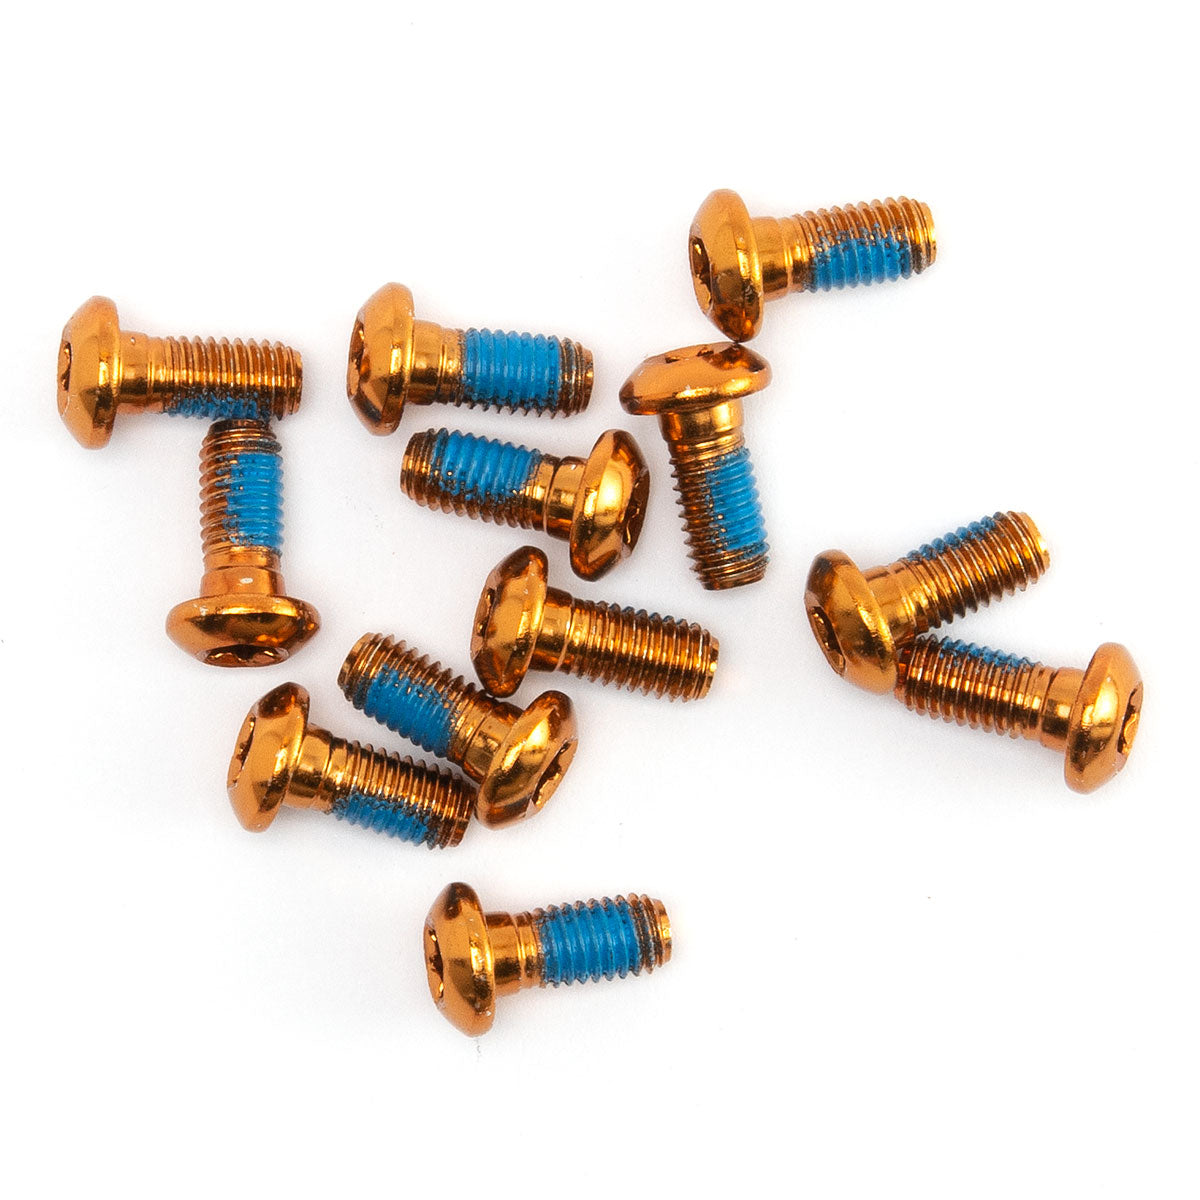 Cleanskin T25 Rotor Bolts - Pack Of 12 - Orange